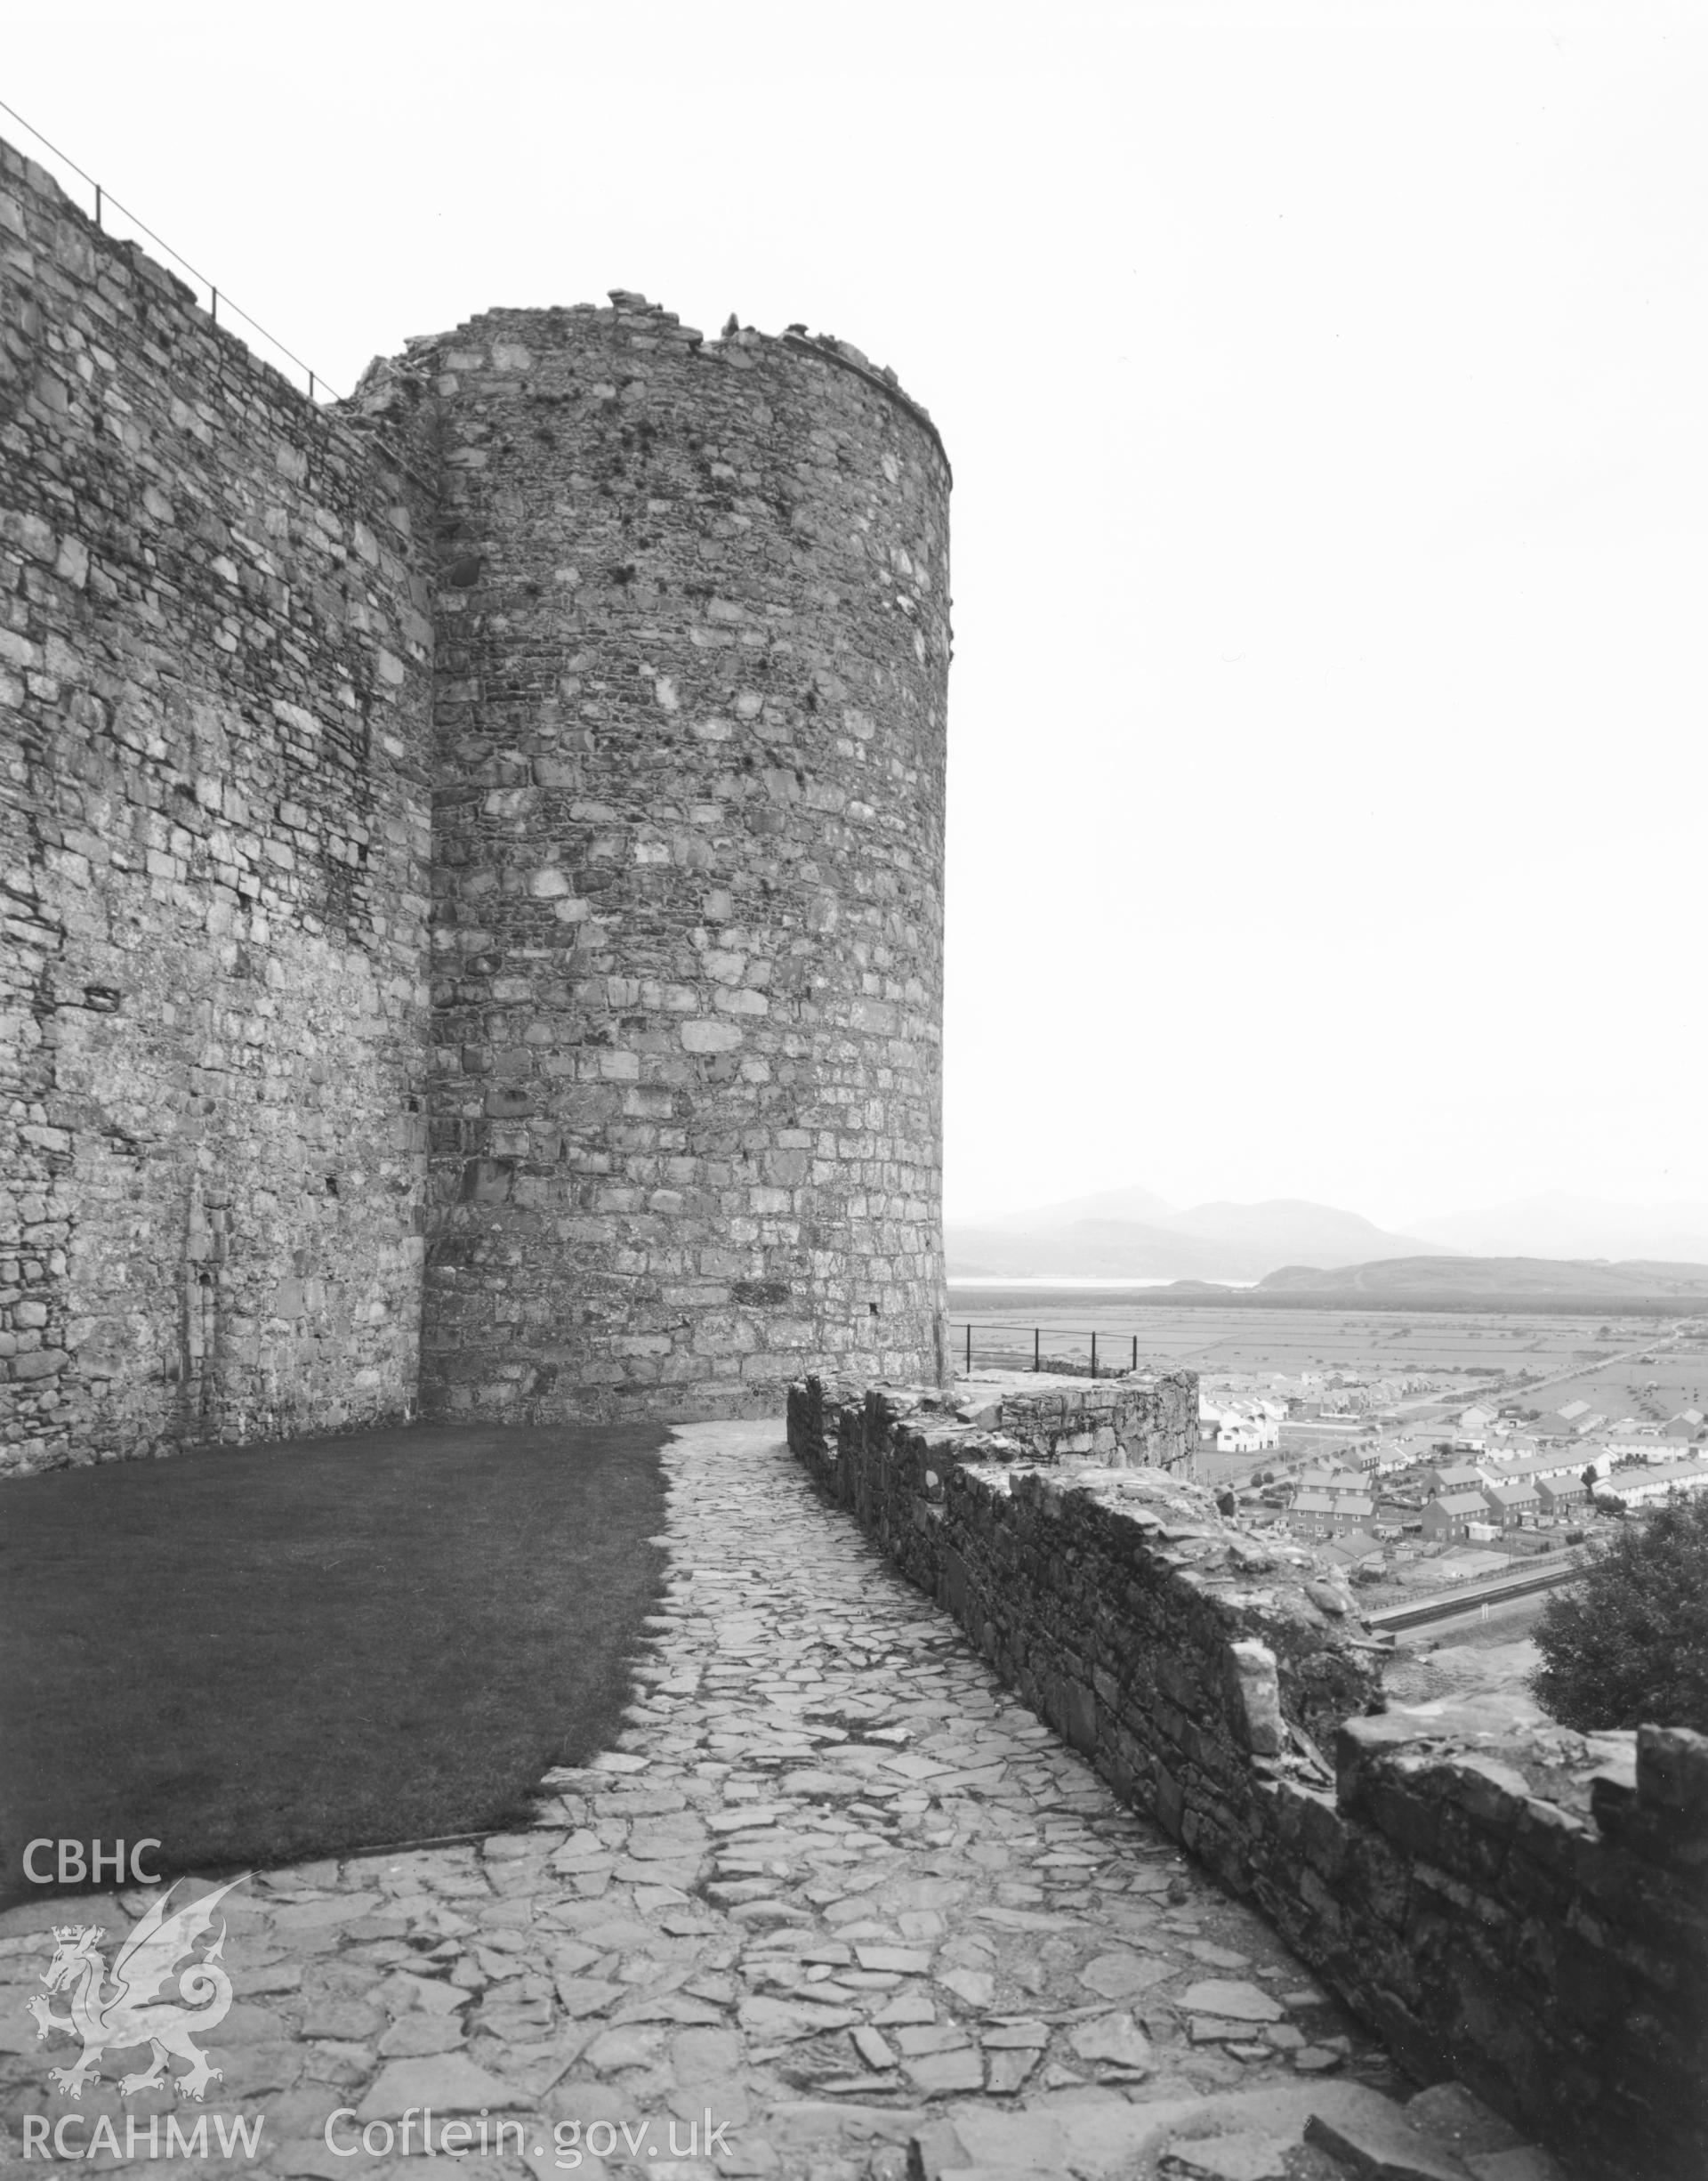 View of the Tower wall at Harlech Castle, taken in 1982, from the Central Office of Information.